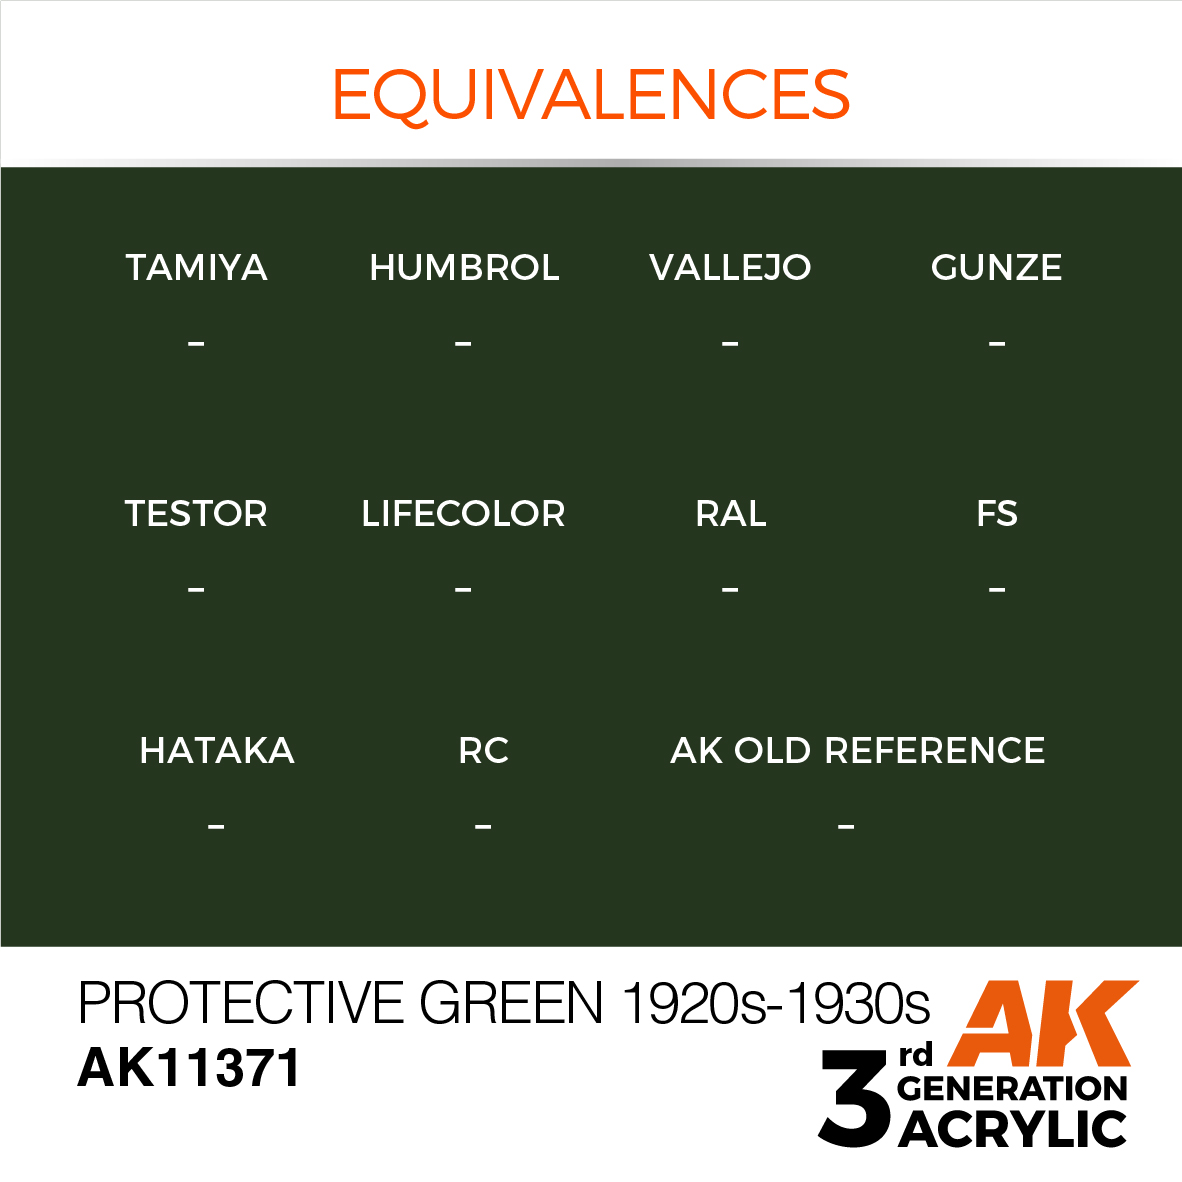 Protective Green 1920s-1930s – AFV